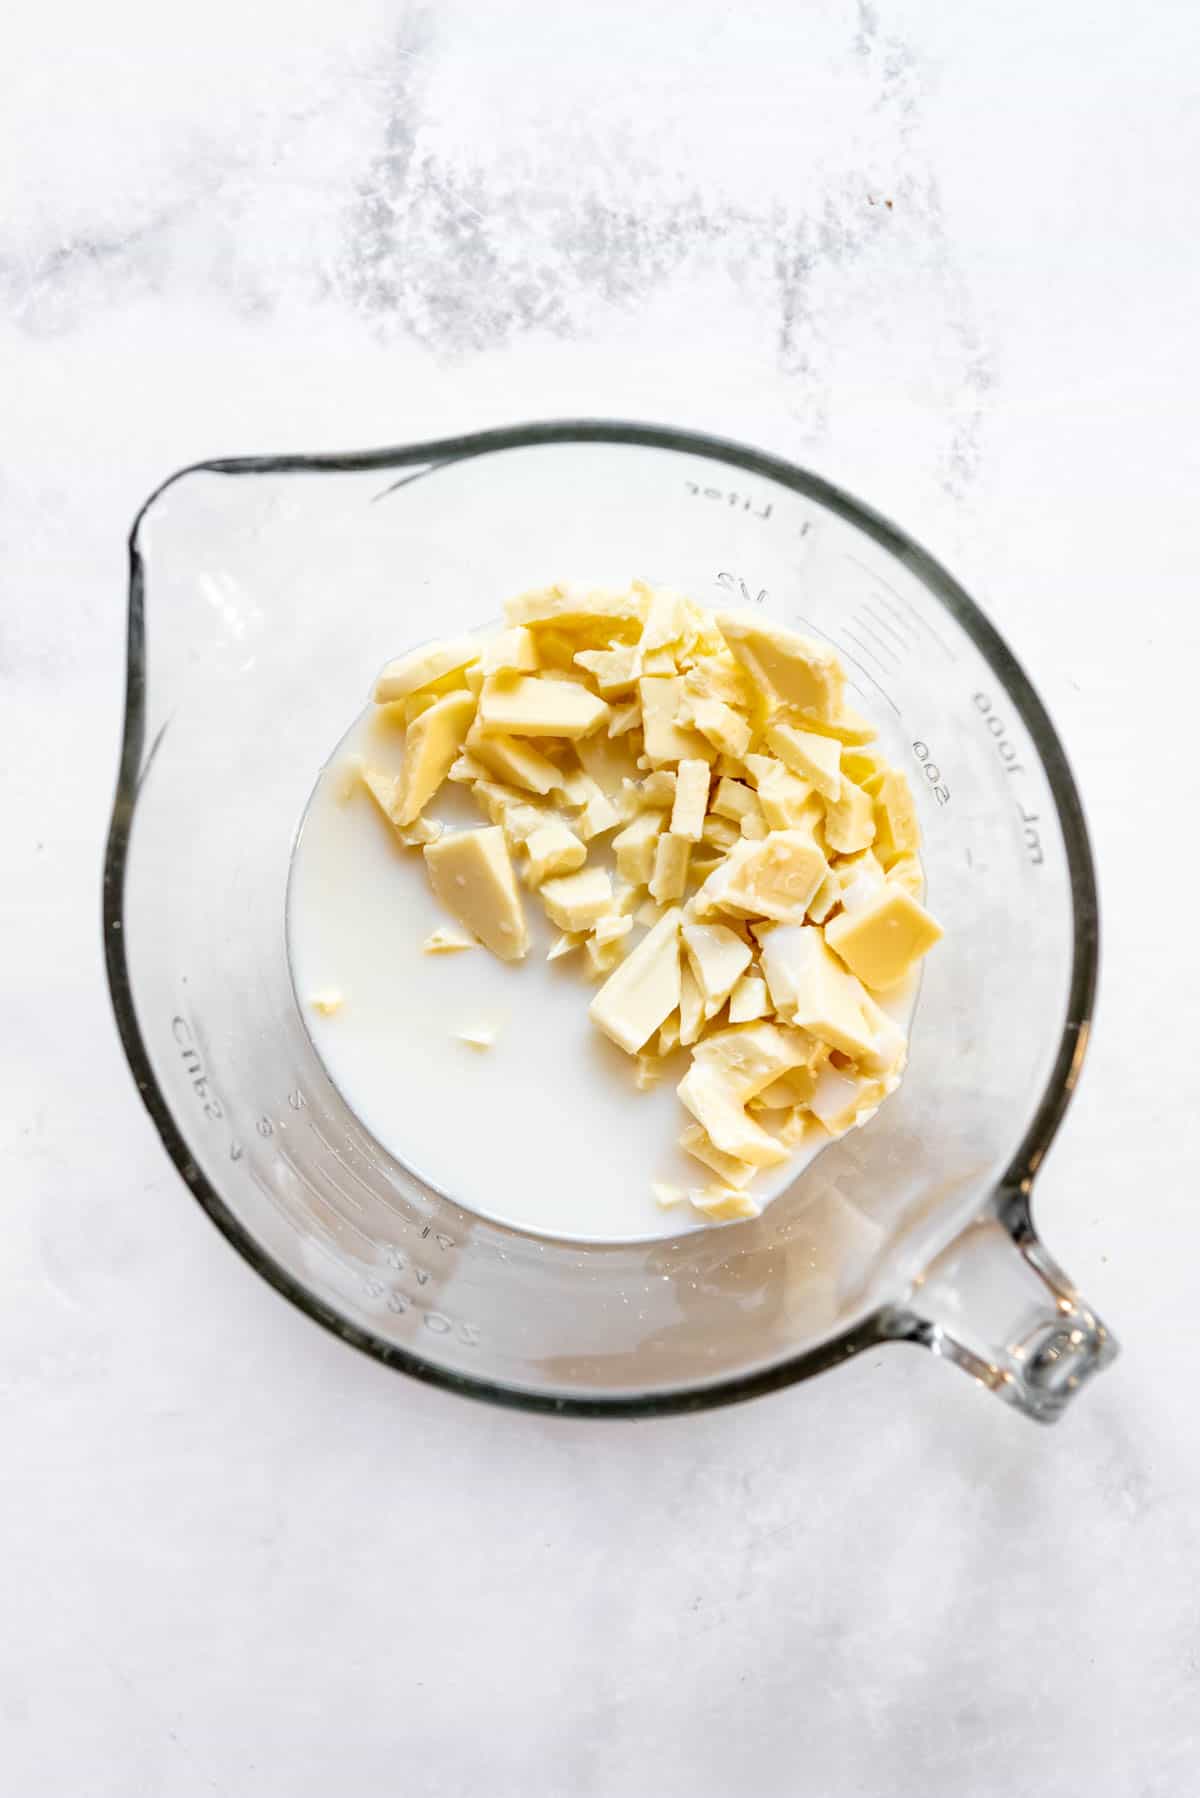 Chopped white chocolate and milk in a large bowl.